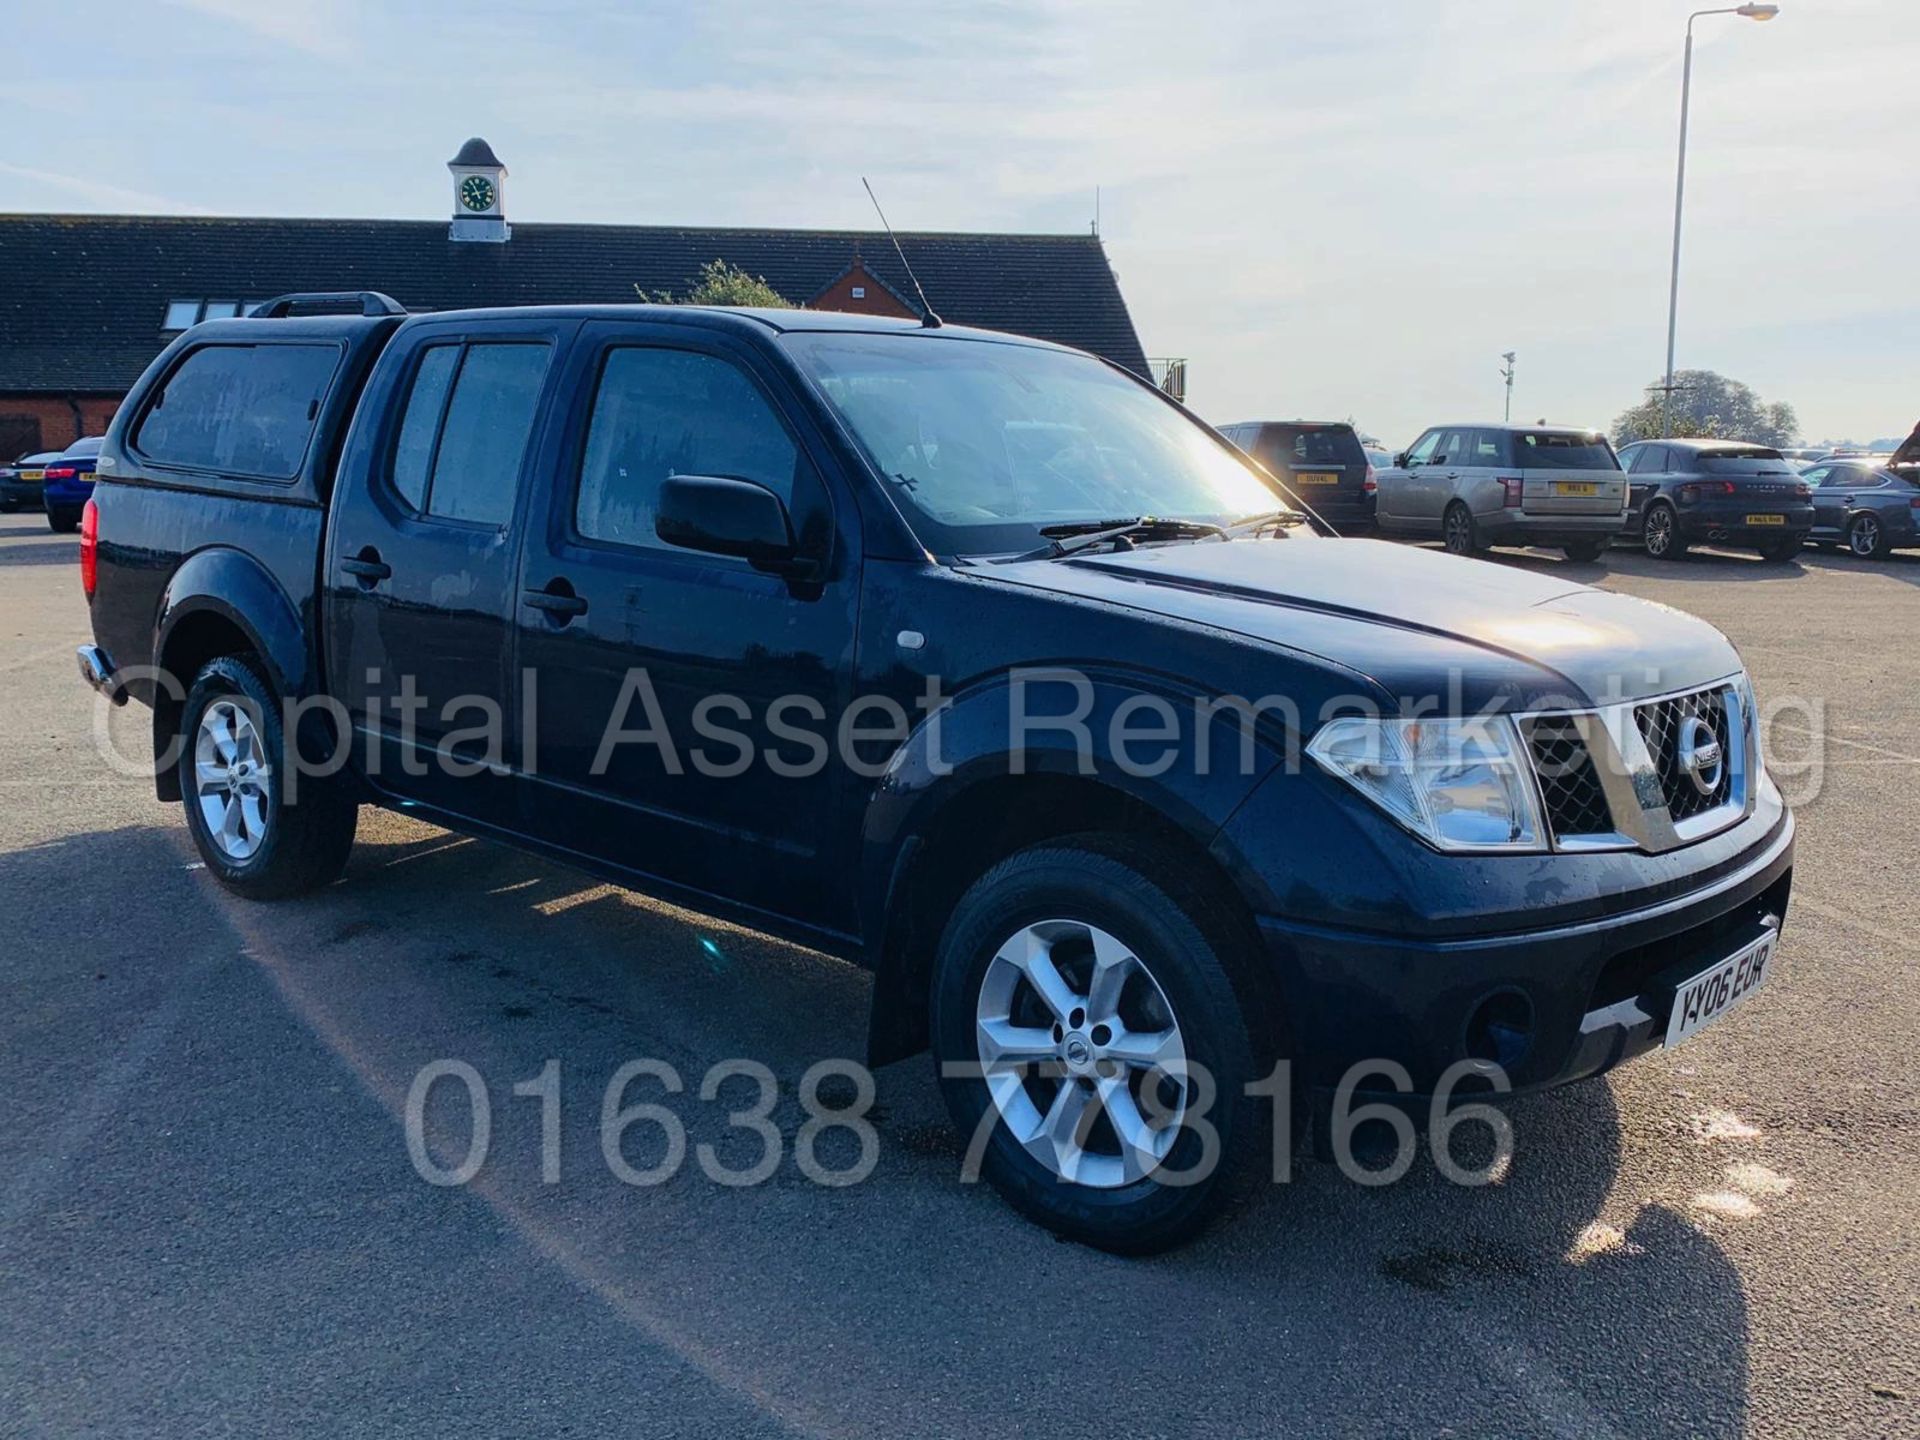 (On Sale) NISSAN NAVARA *SE EDITION* D/CAB PICK-UP (2006) '2.5 DCI - 175 BHP - 6 SPEED' *AIR CON* - Image 2 of 30